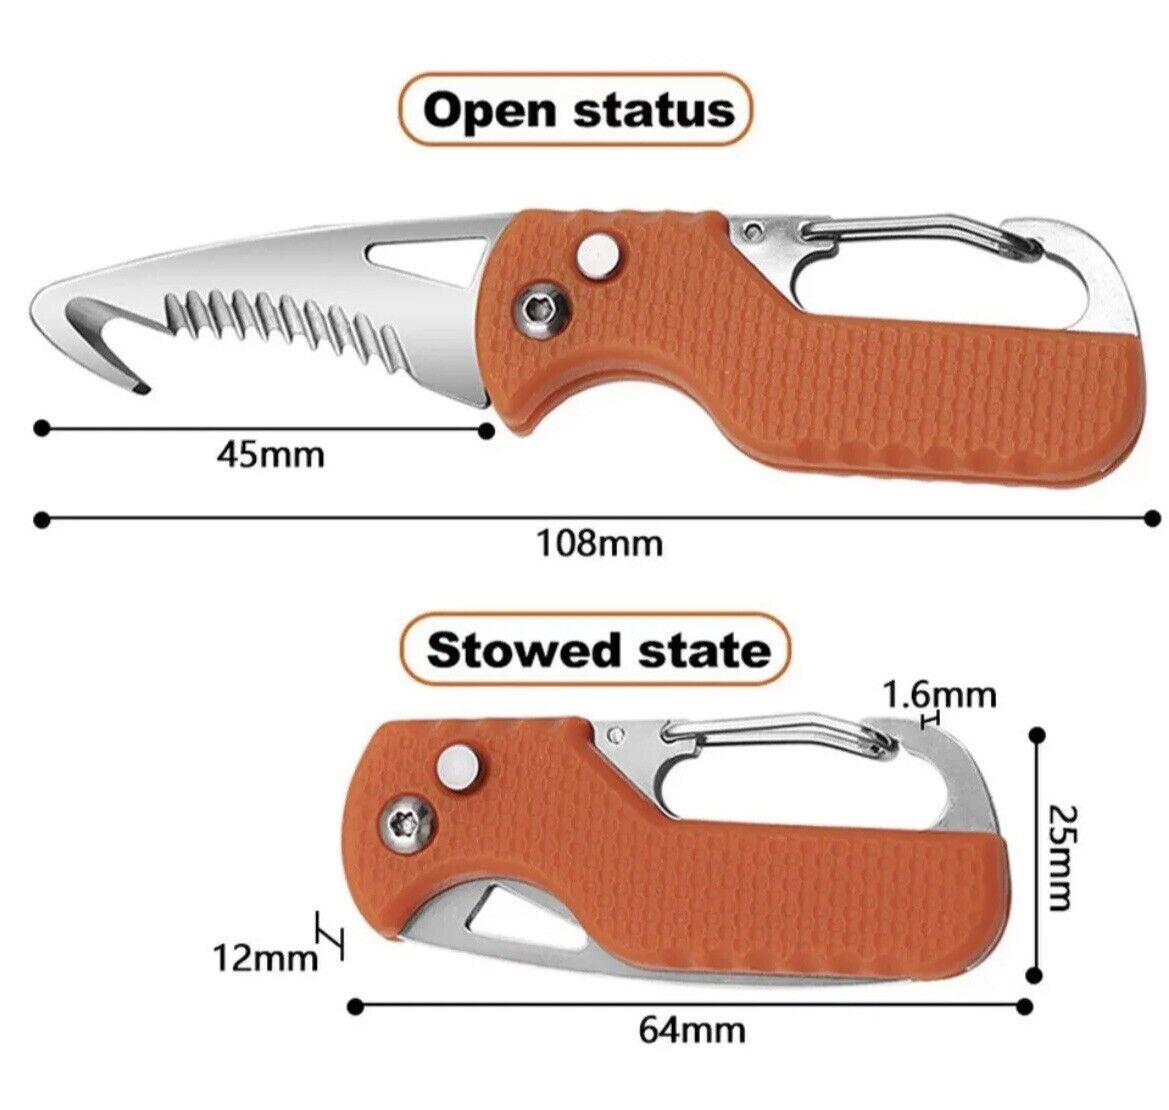  ITOKEY Keychain Knife, 2 Pack Carabiner keychain, Small Pocket  Box/Seatbelt/Strap Cutter, Razor Sharp Serrated Blade and Paratrooper Hook,  EDC Folding Knives, Key Chains for Women Men Everyday Carry : Tools 